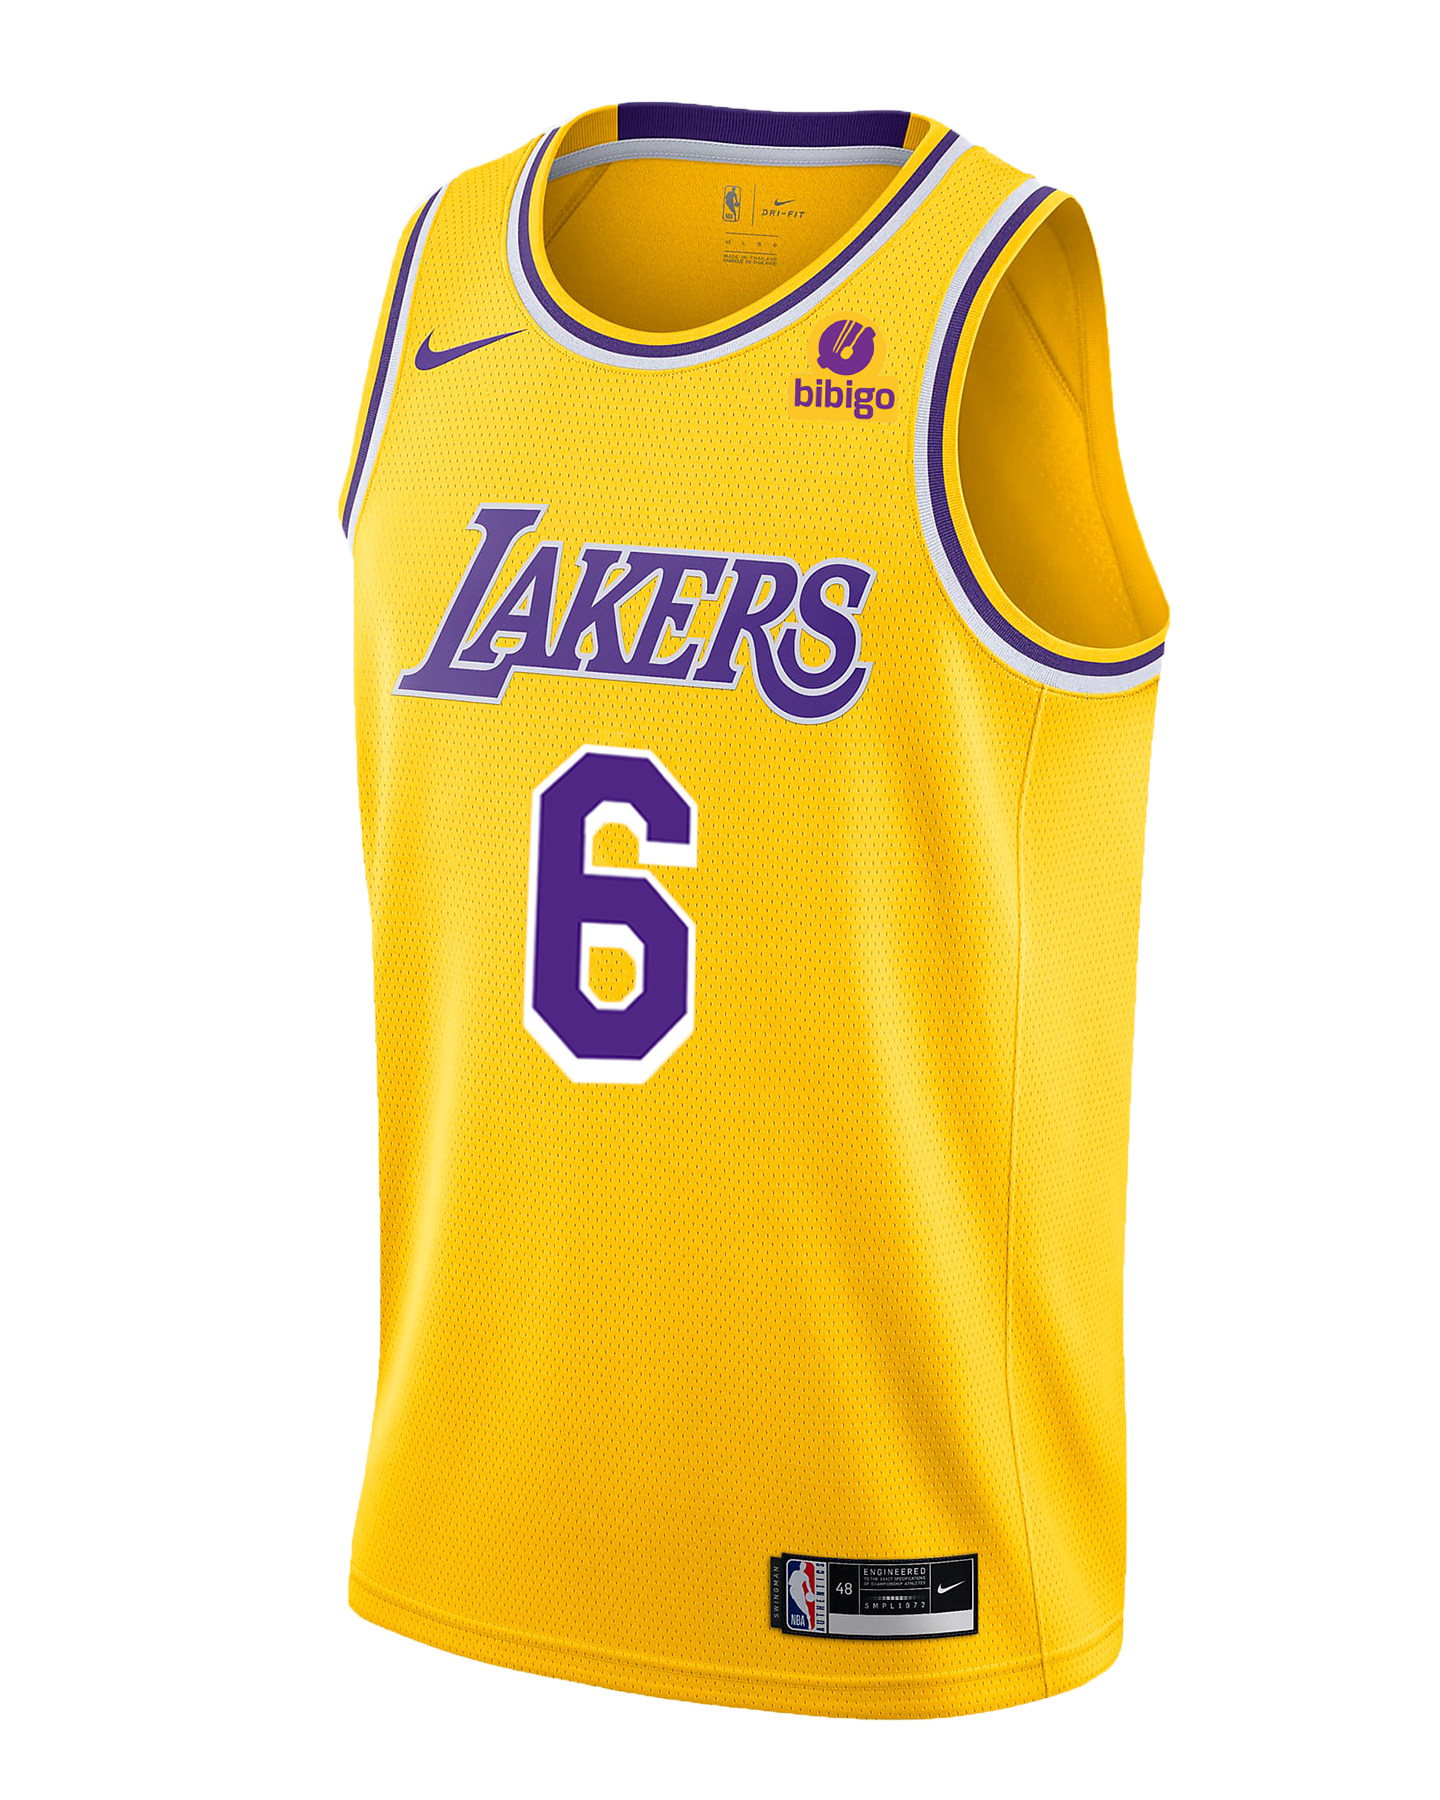 james lakers shirt official